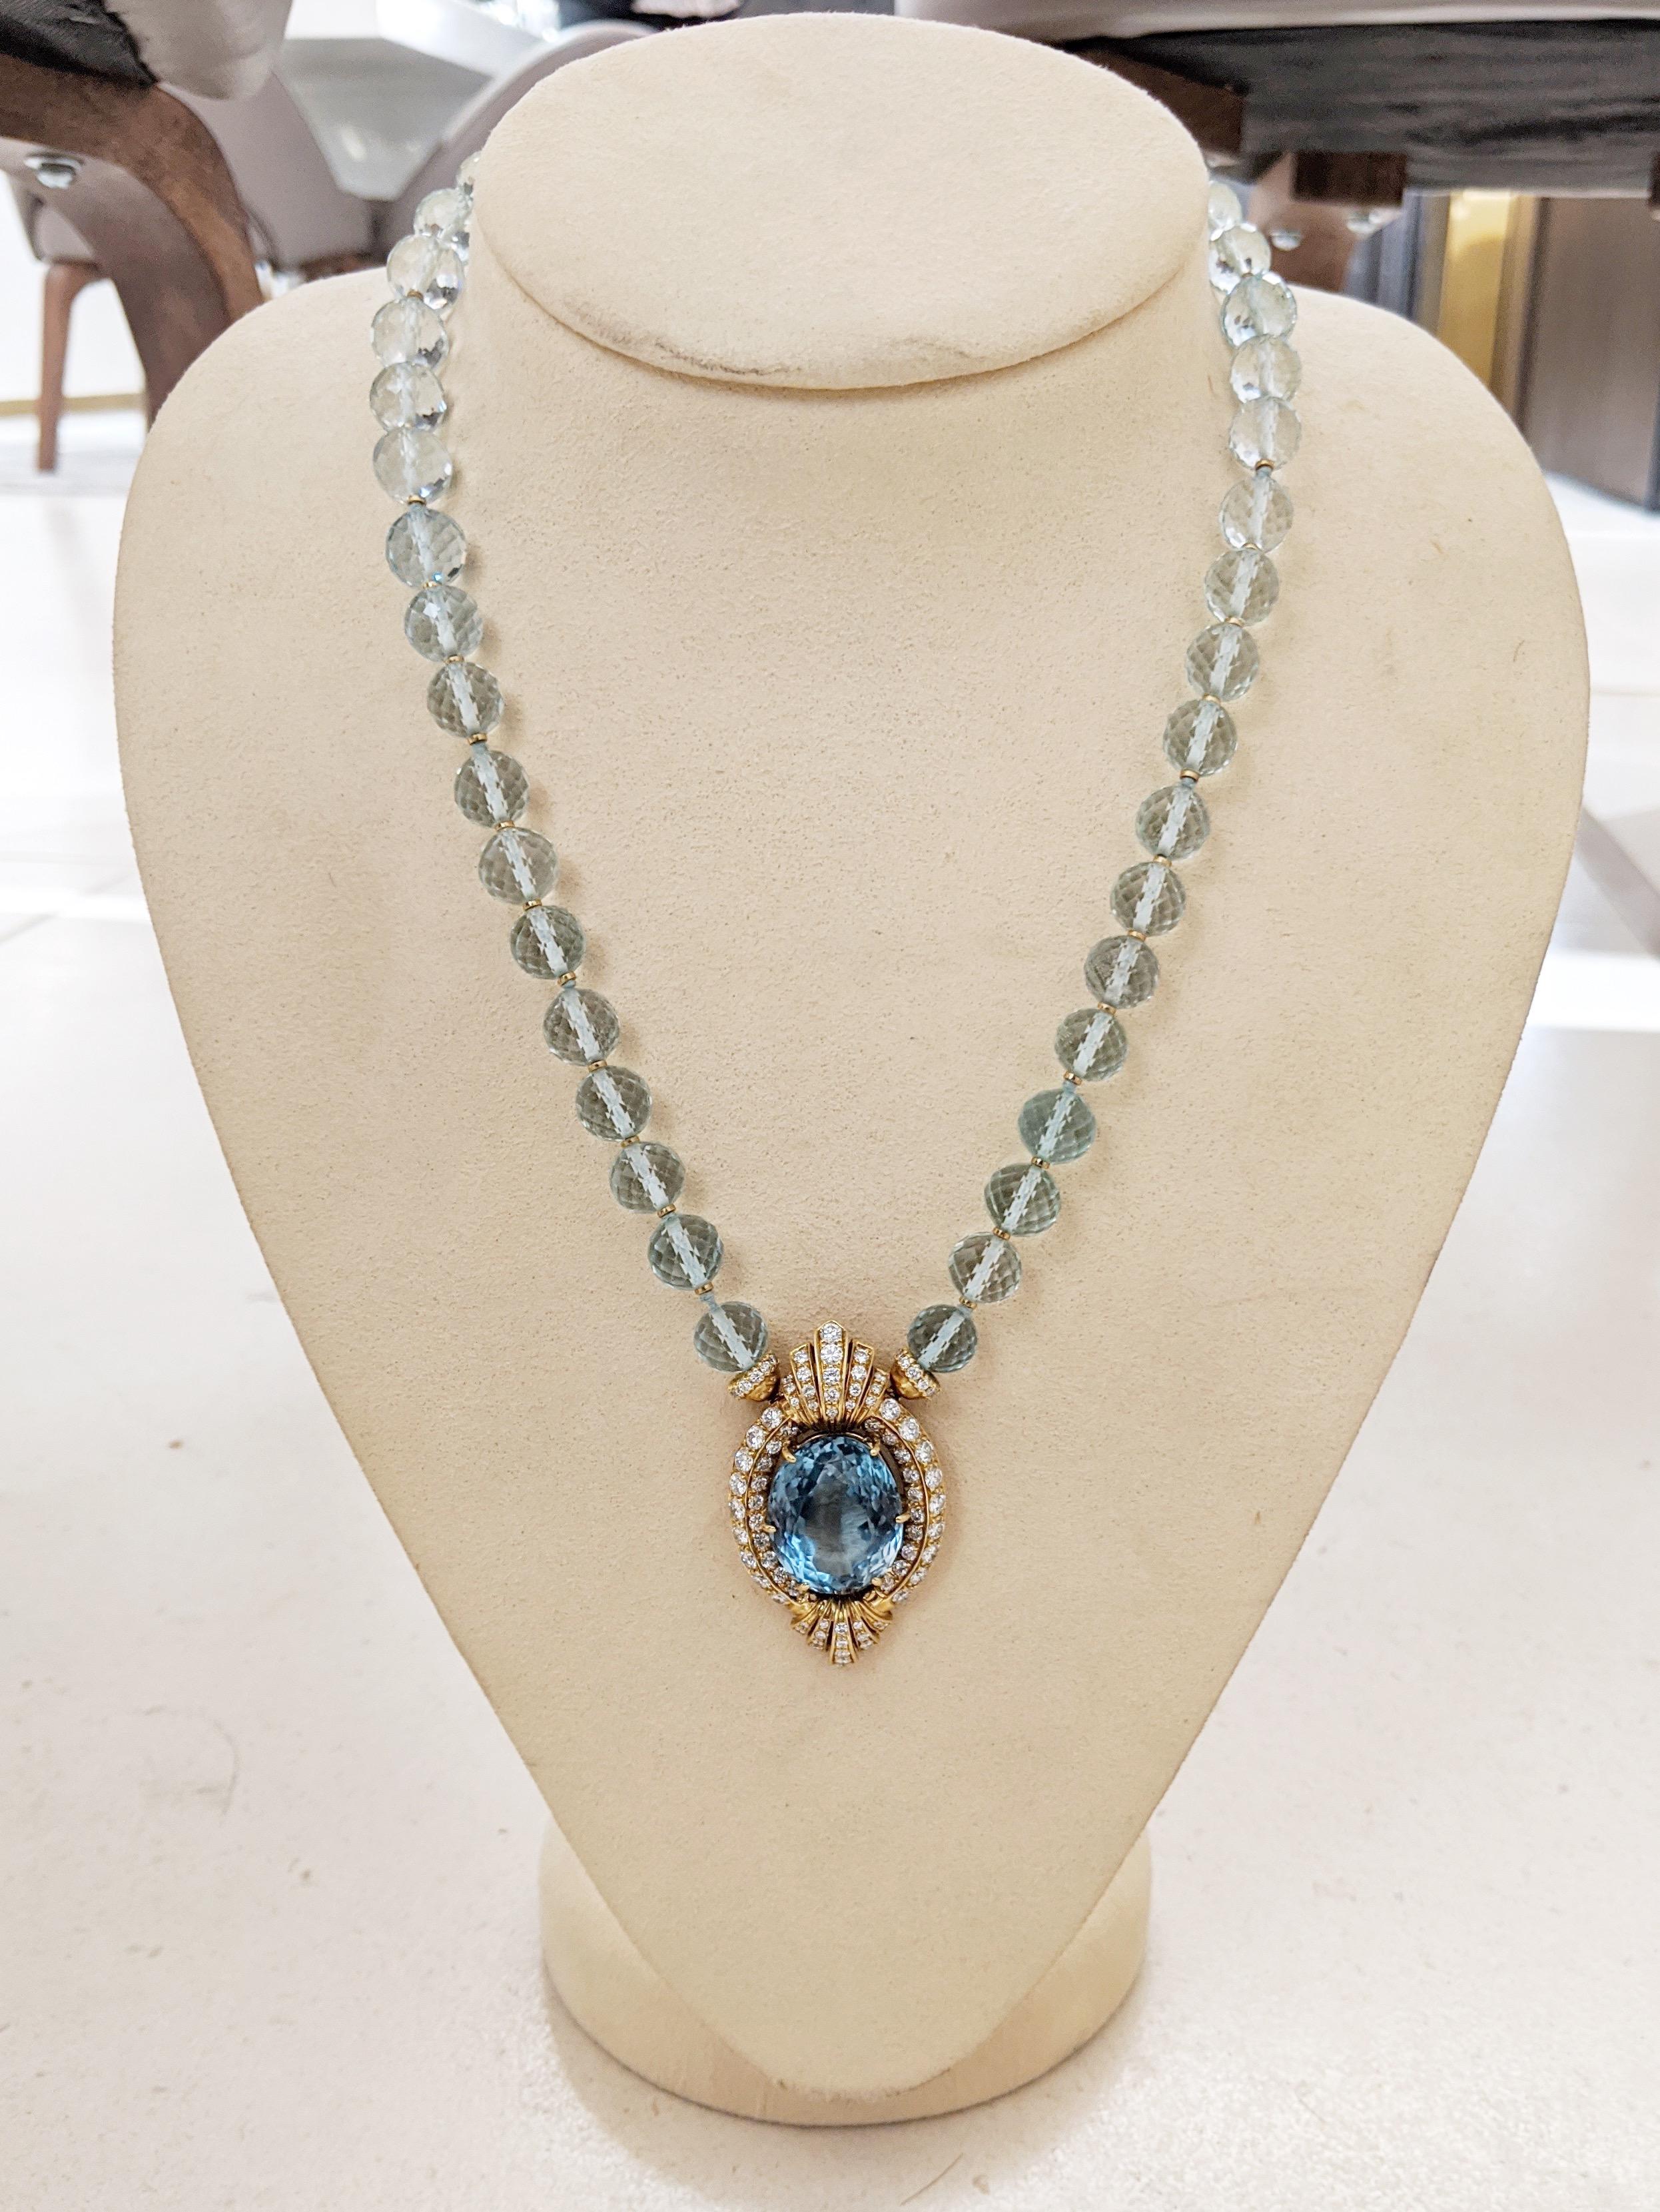 18 Karat Gold Diamonds and 43.50 Carat Blue Topaz Necklace with Aquamarine Beads In New Condition For Sale In New York, NY